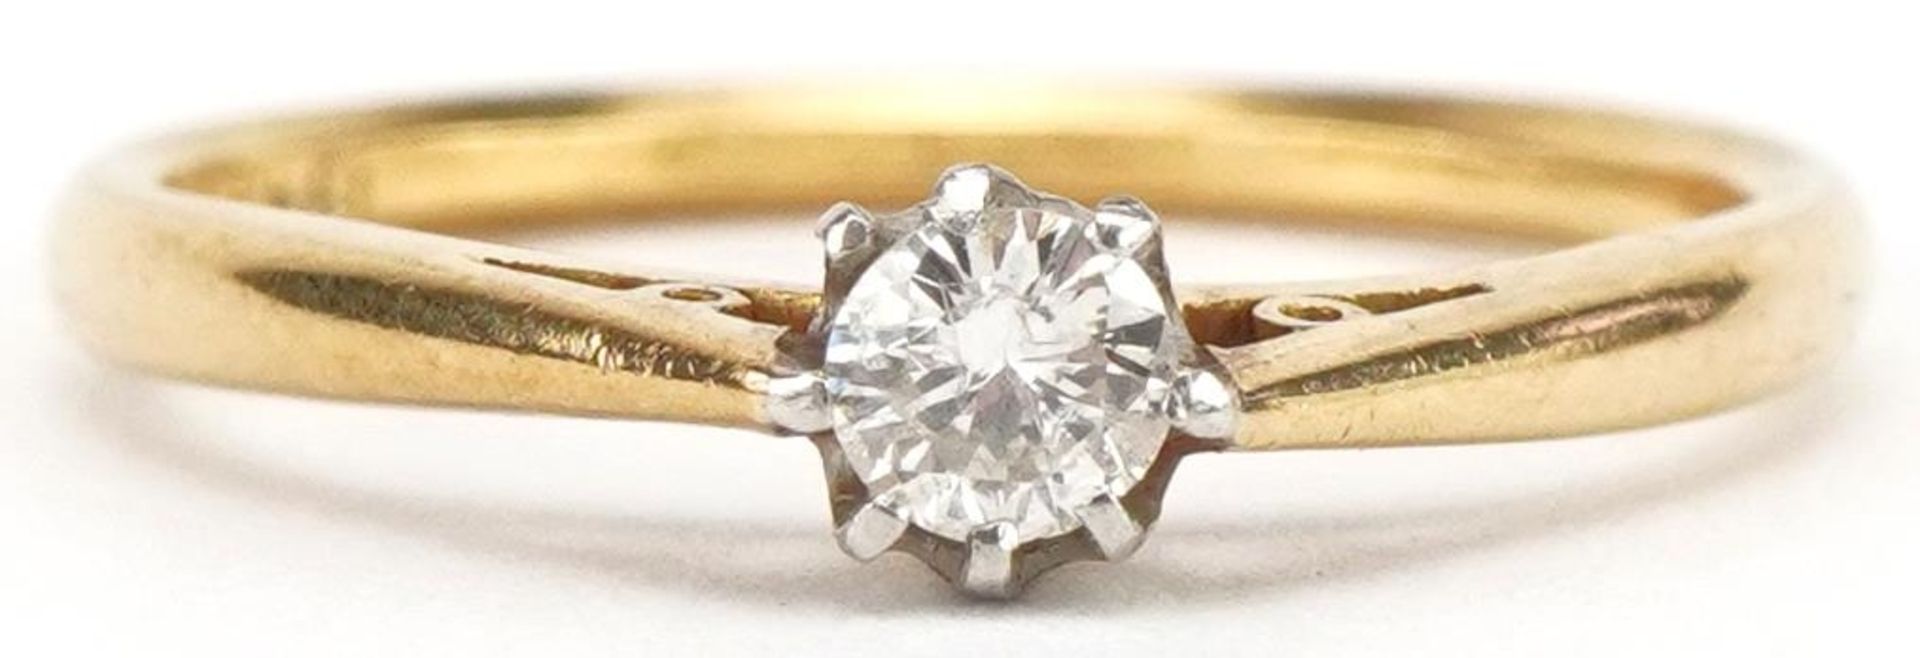 18ct gold and platinum diamond solitaire ring, diamond weight approximately 0.21 carat, size O, 2.3g